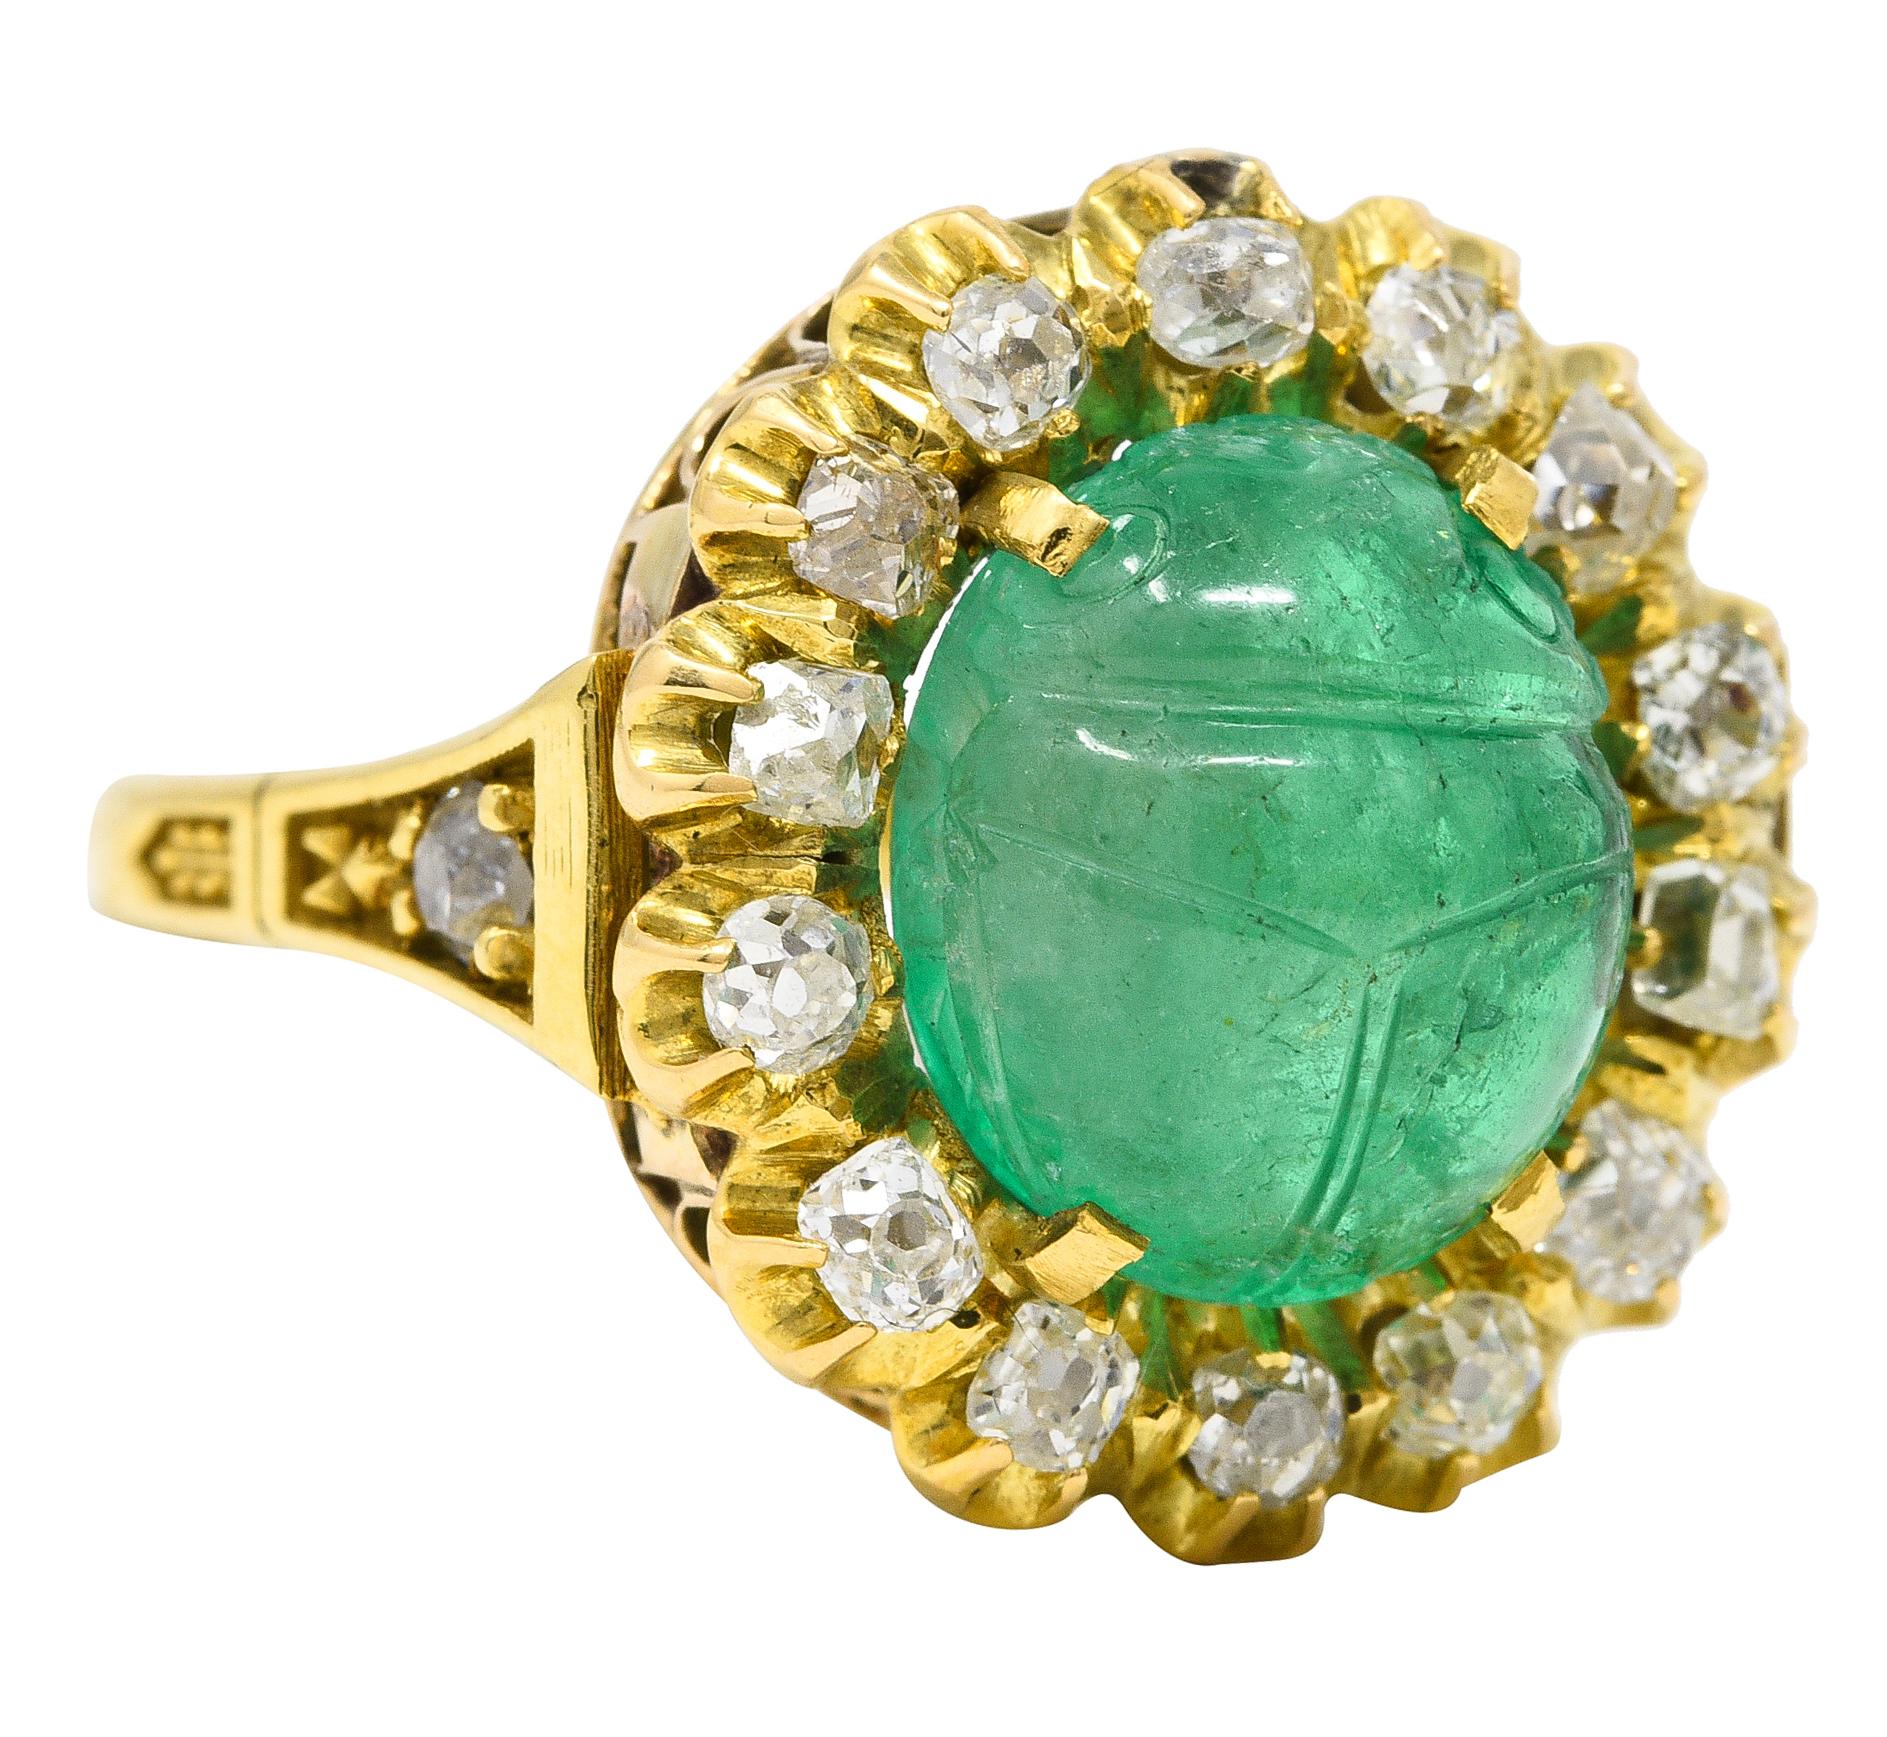 Featuring an antique circular cluster atop vintage cathedral shoulders. Centering an oval emerald cabochon weighing approximately 6.80 carats - bluish green. Deeply carved as a scarab motif and semi-transparent with natural inclusions - some surface